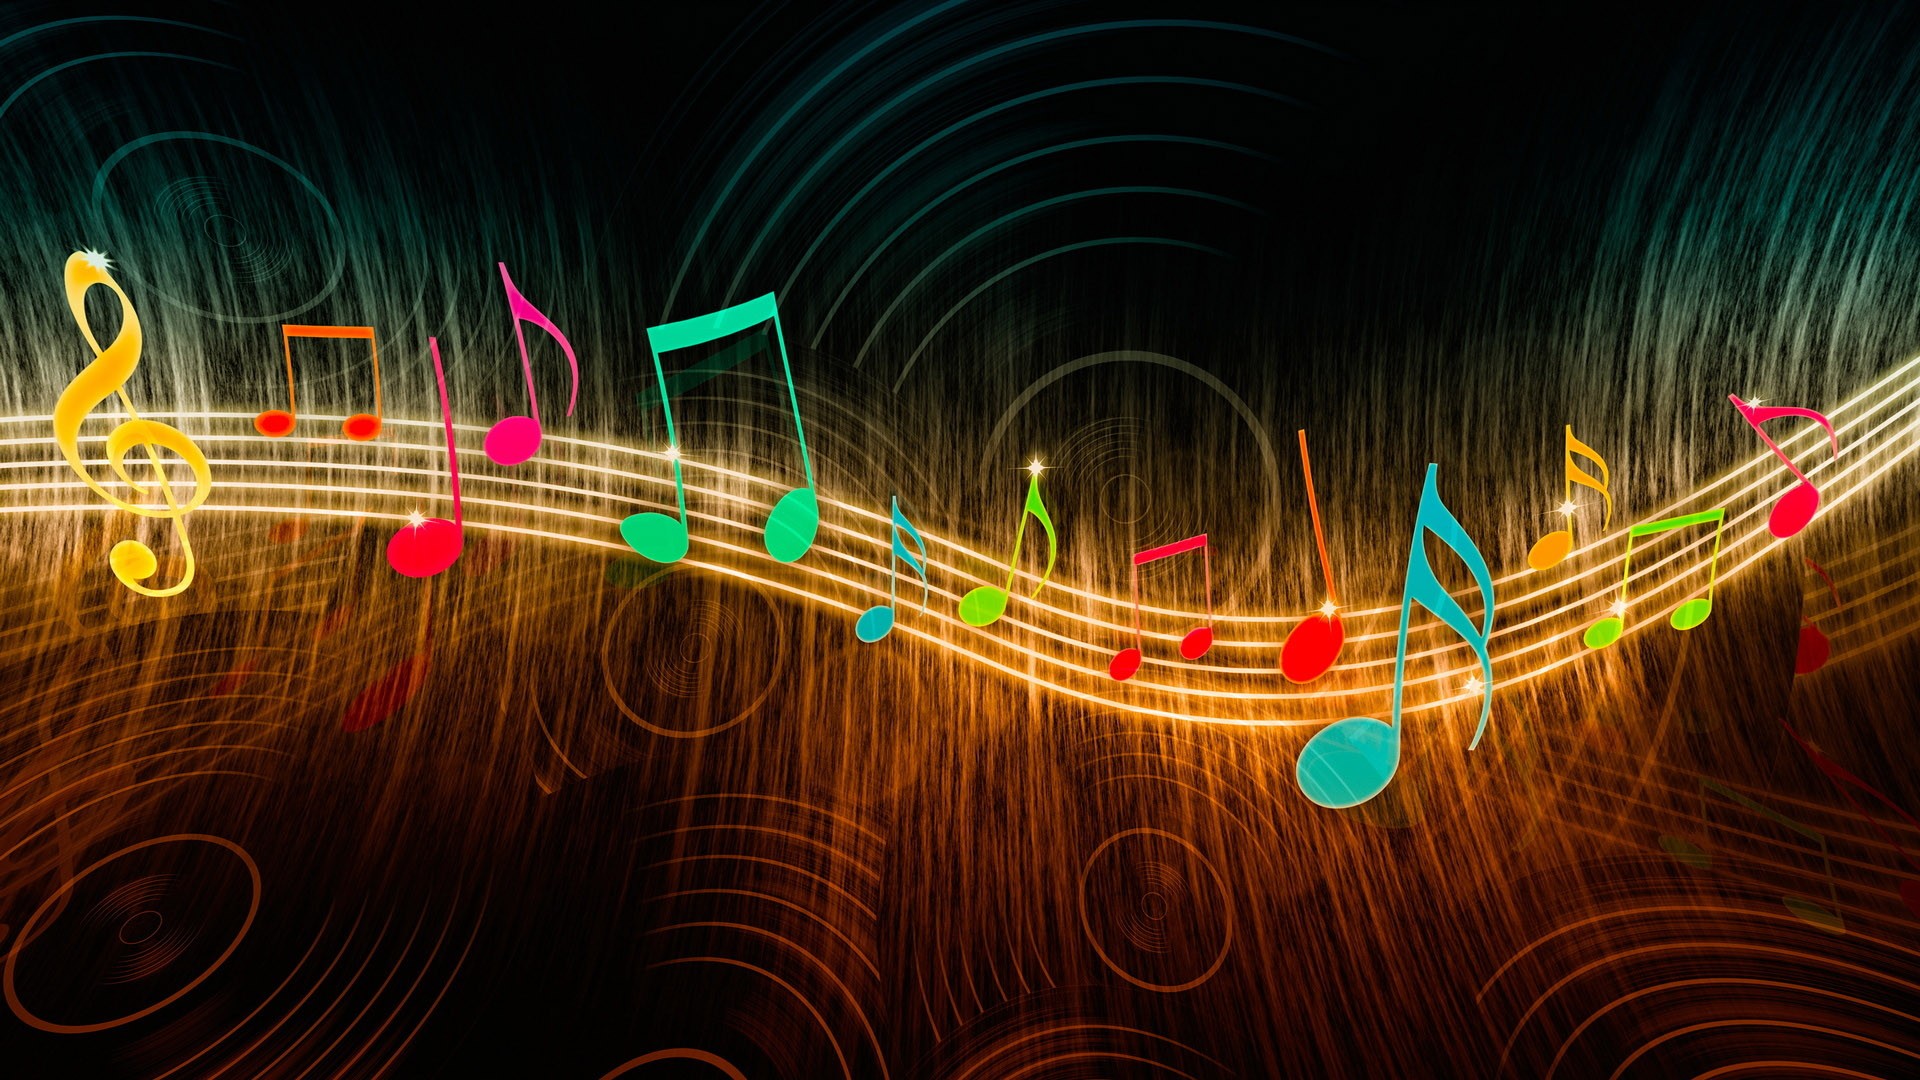 Digital Art Music Musical Notes Wavy Lines Circle Colorful Glowing Treble Clef 1920x1080